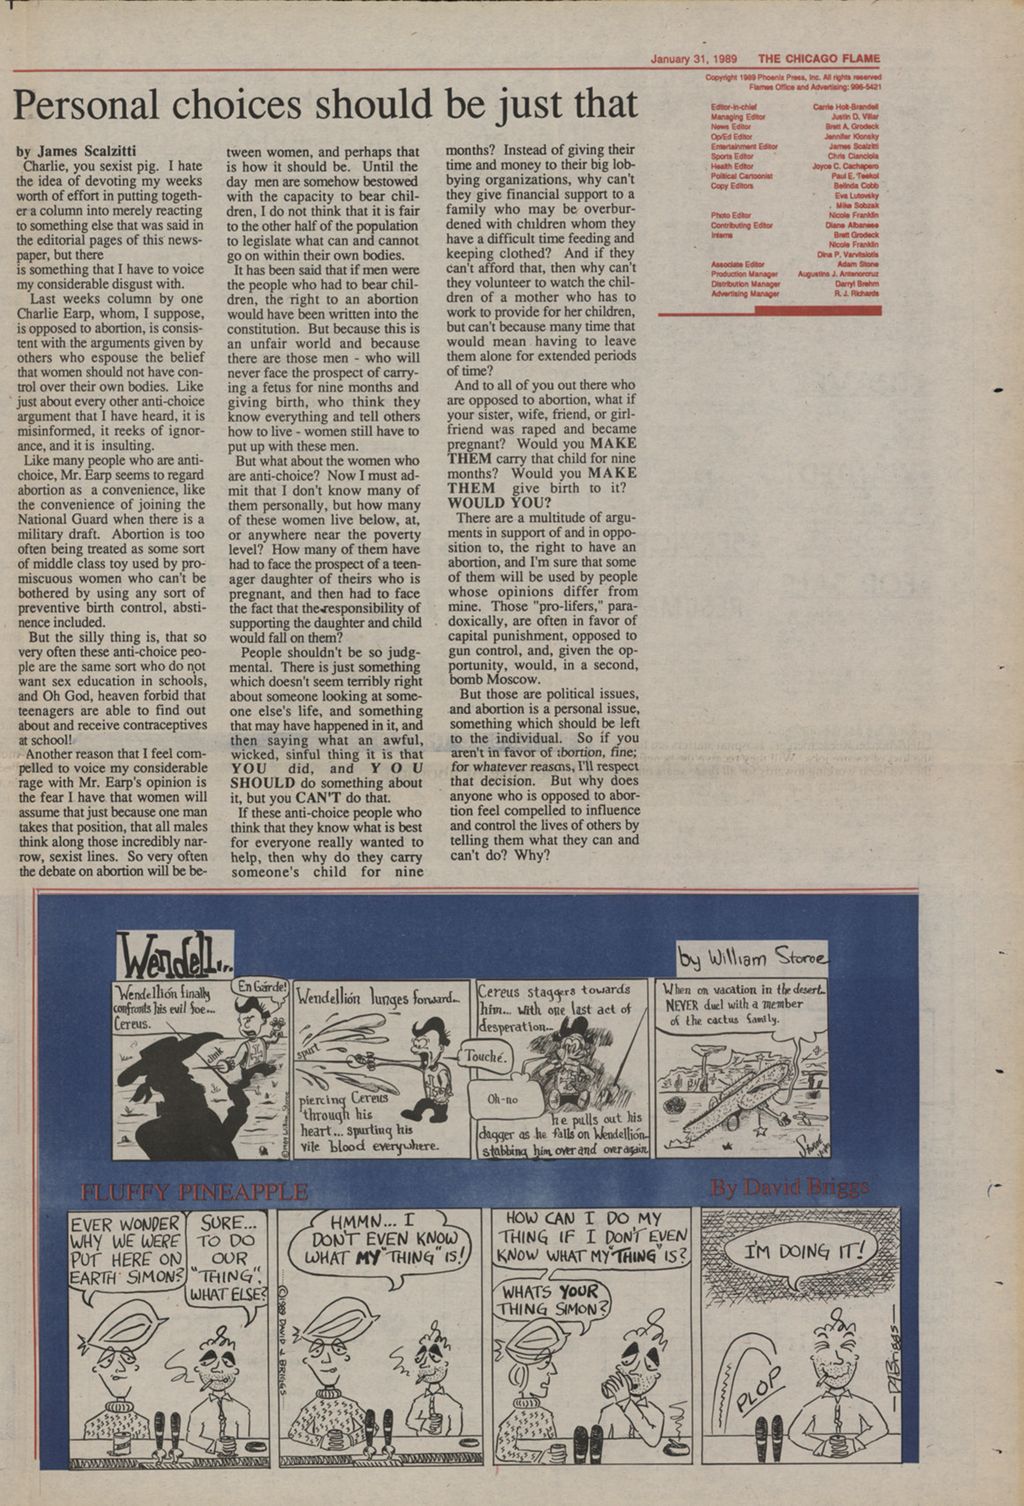 Chicago Flame (January 31, 1989)